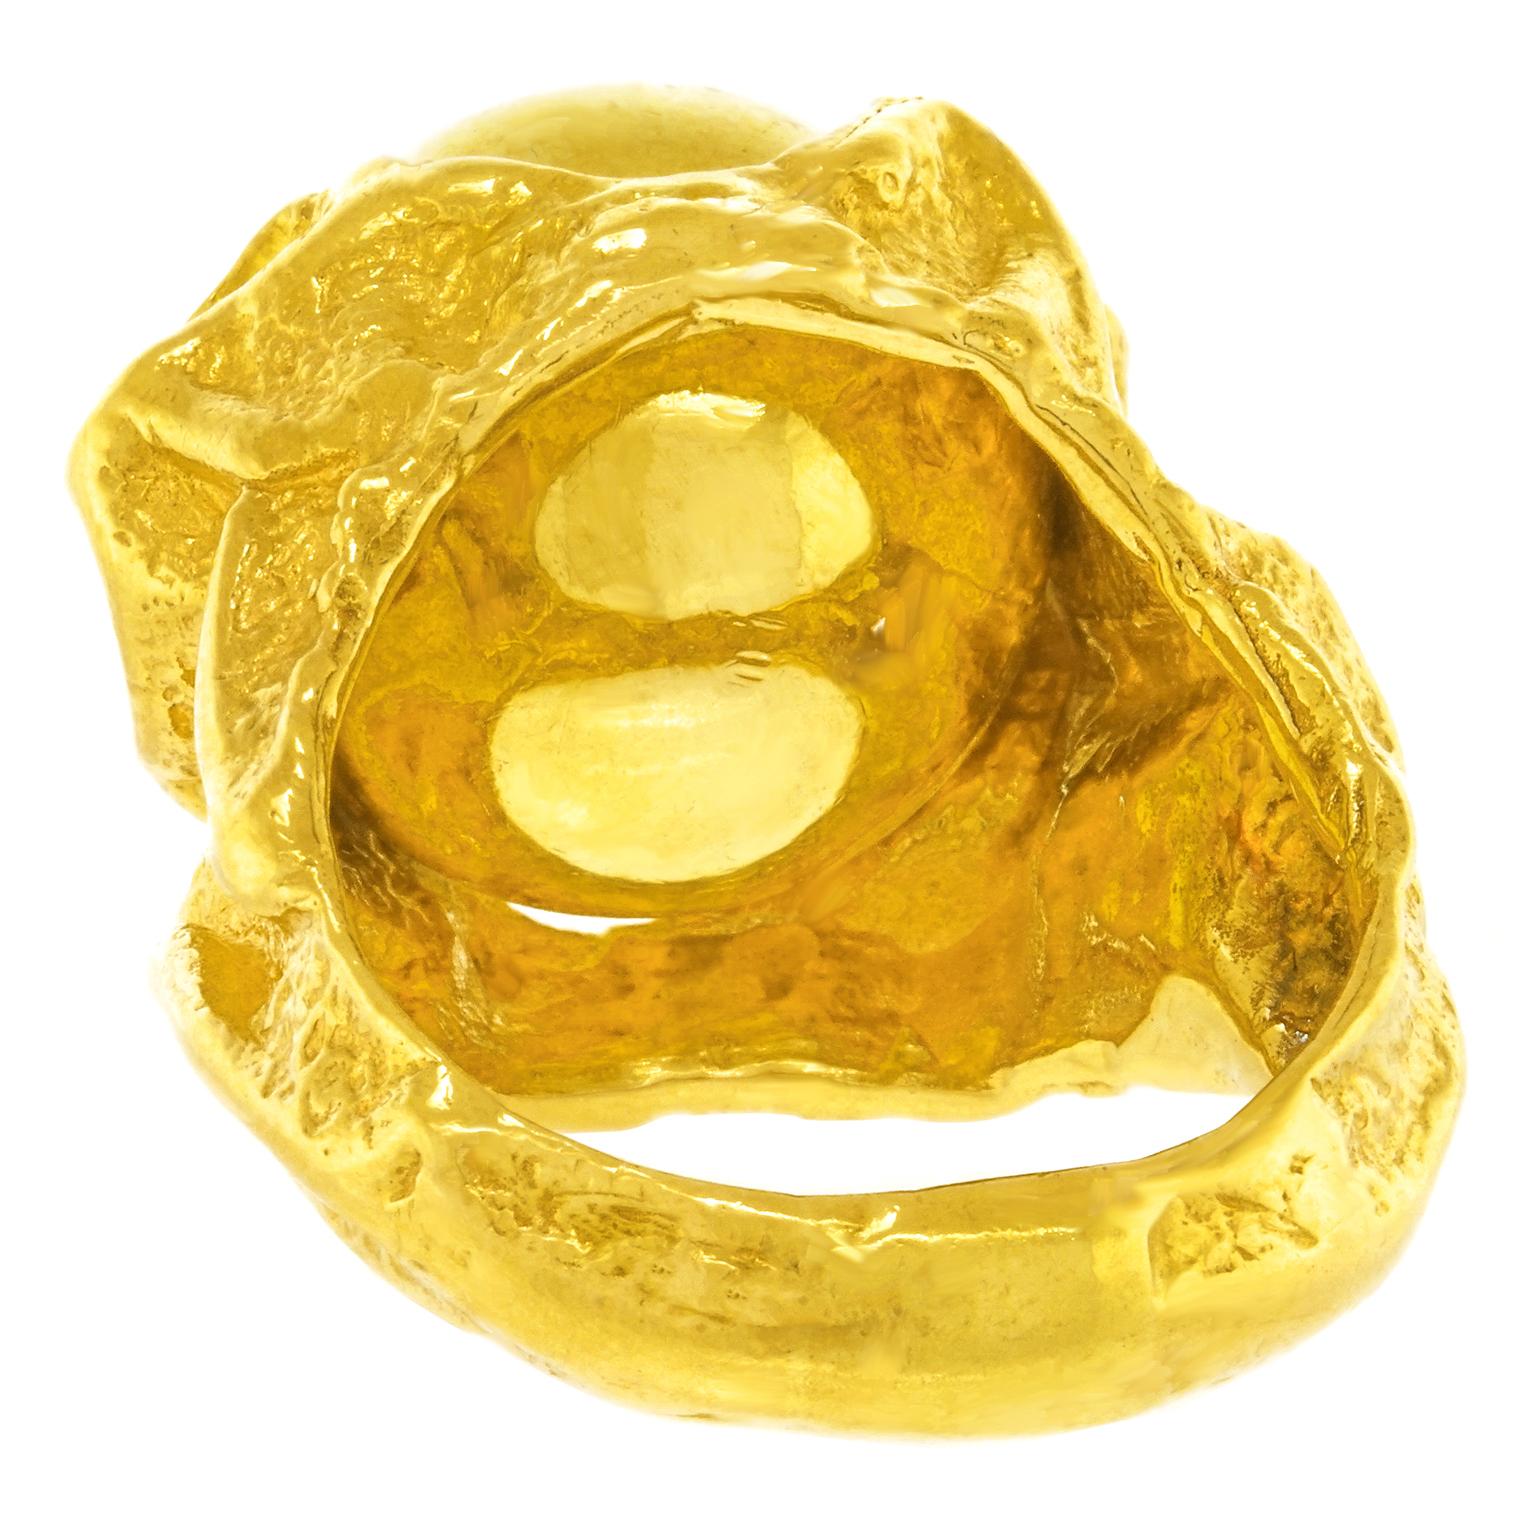 Gilbert Albert Gold Ring with Interchangeable Stones For Sale 3